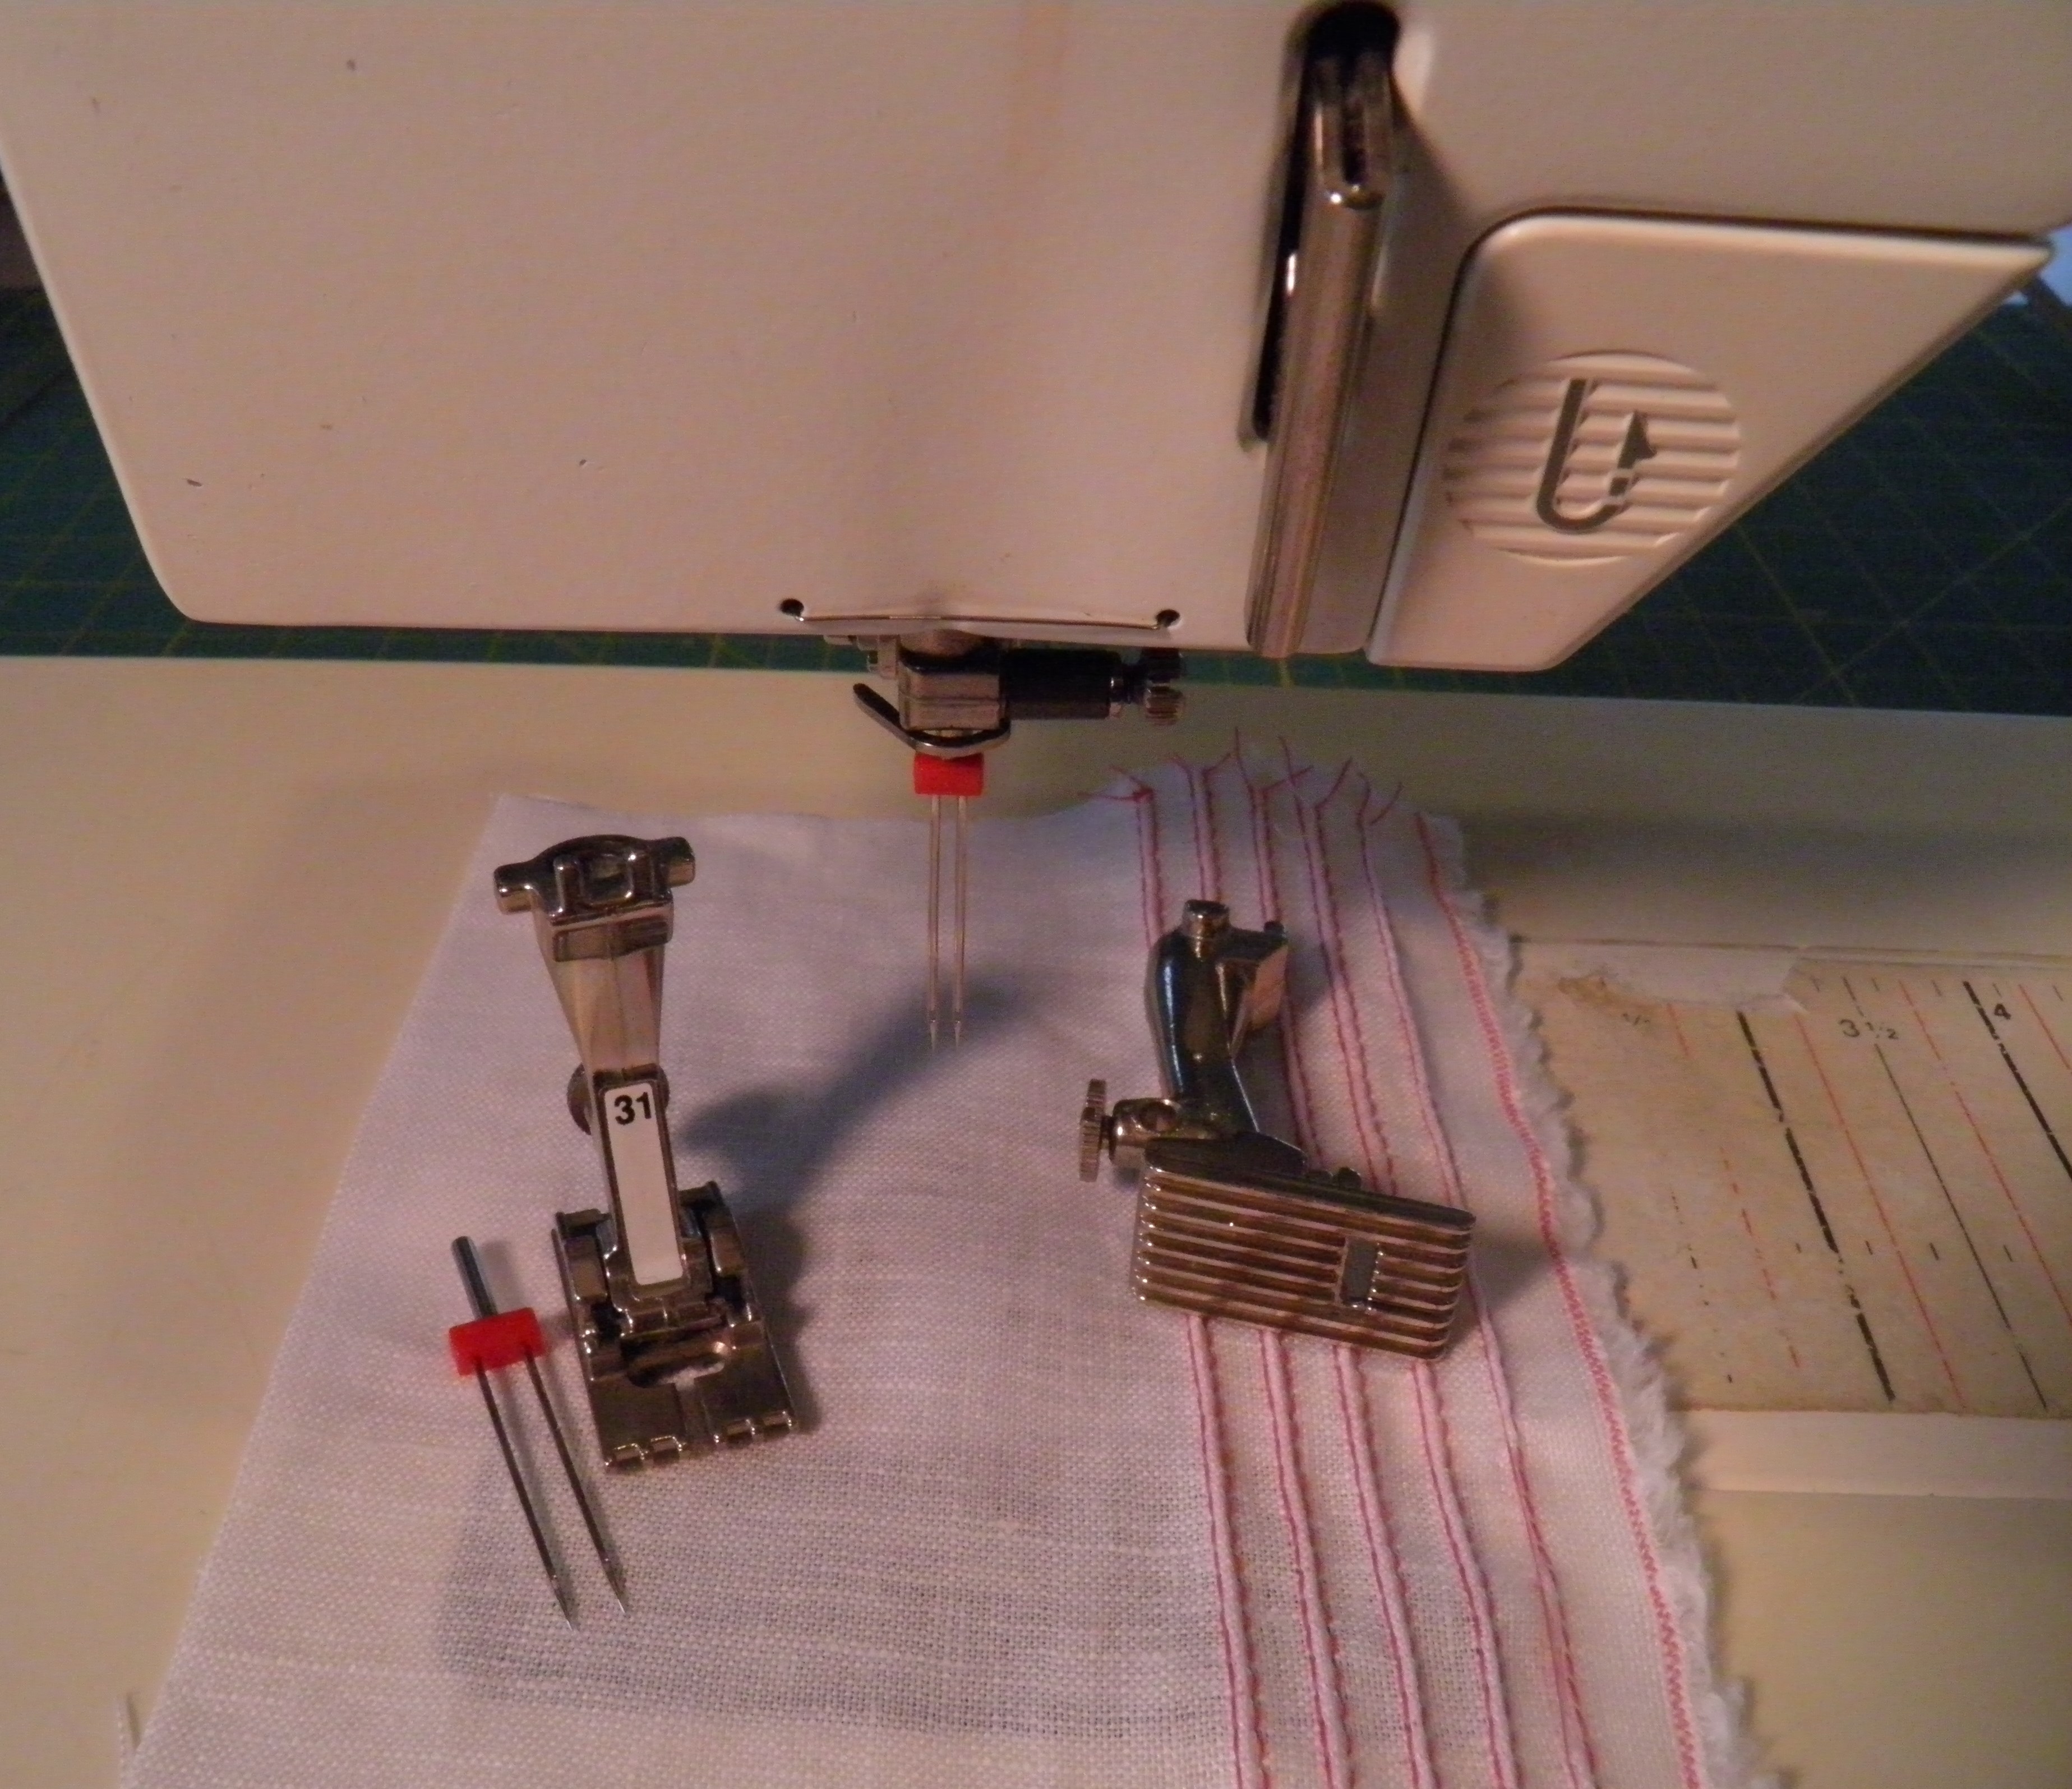 Sewing Machine and Pintuck Feet